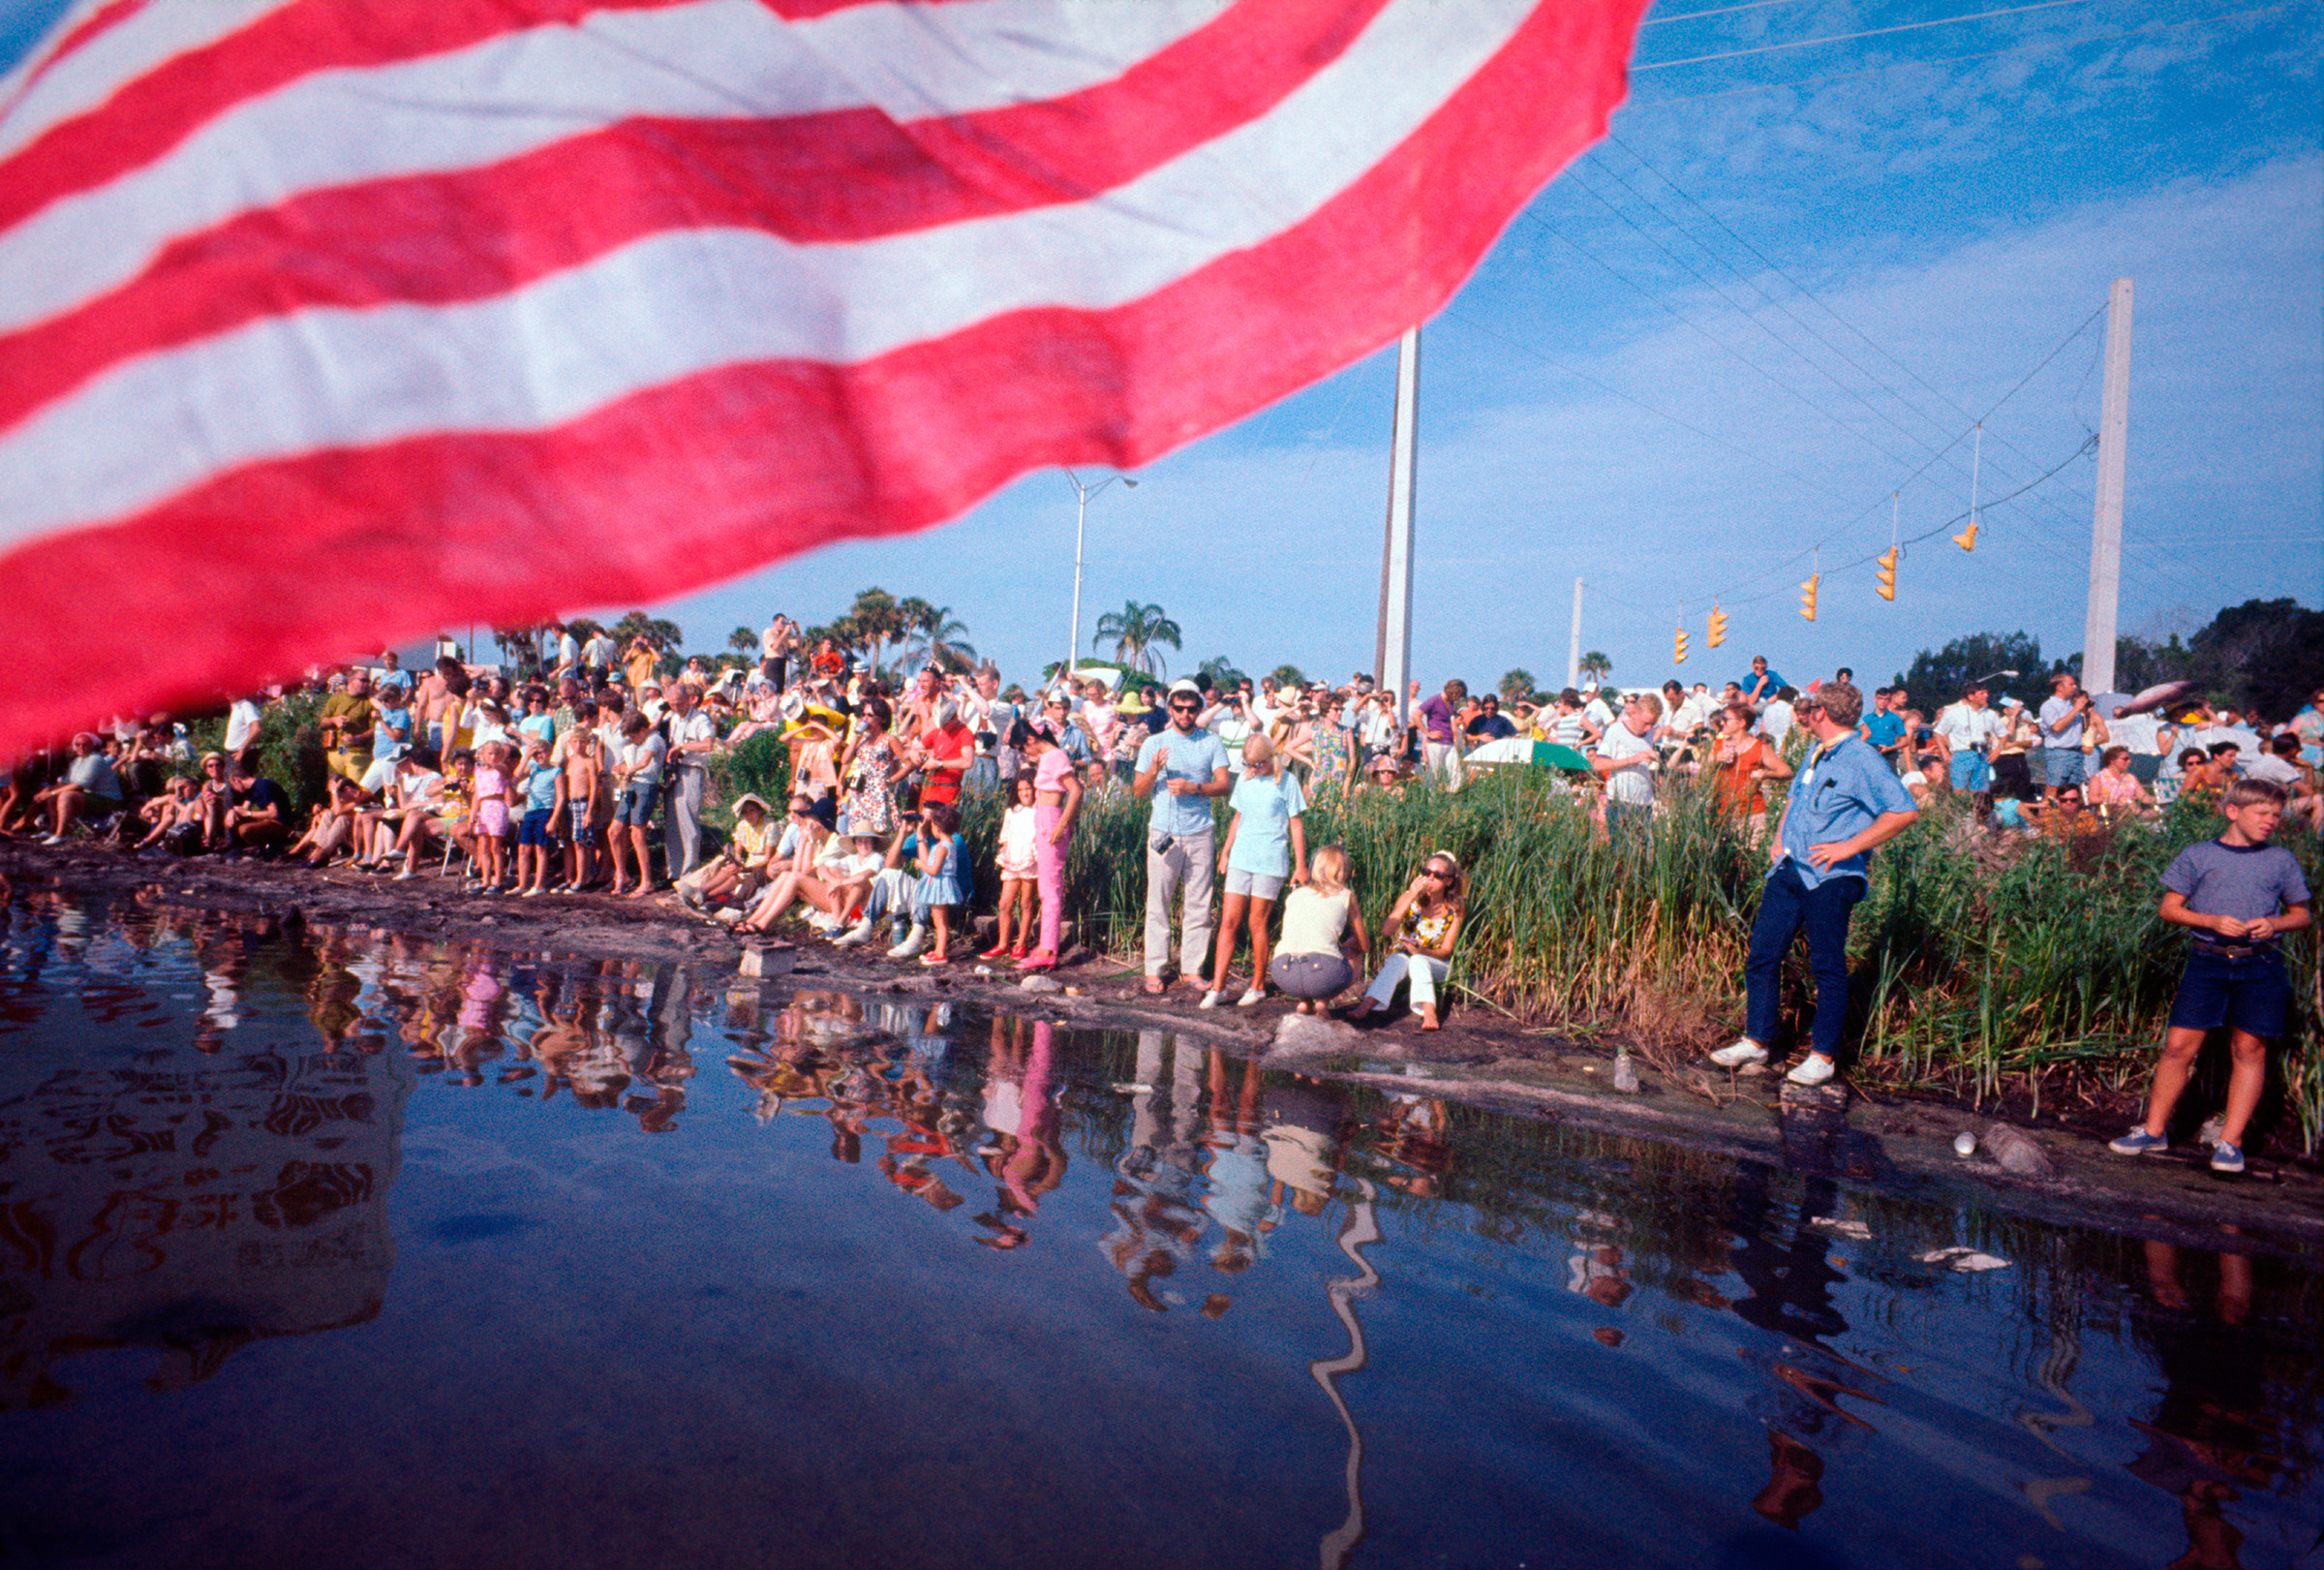 Crowds in Titusville, Florida await the Apollo 11 launch on July 16, 1969. (David Burnett —Contact Press Images for TIME)